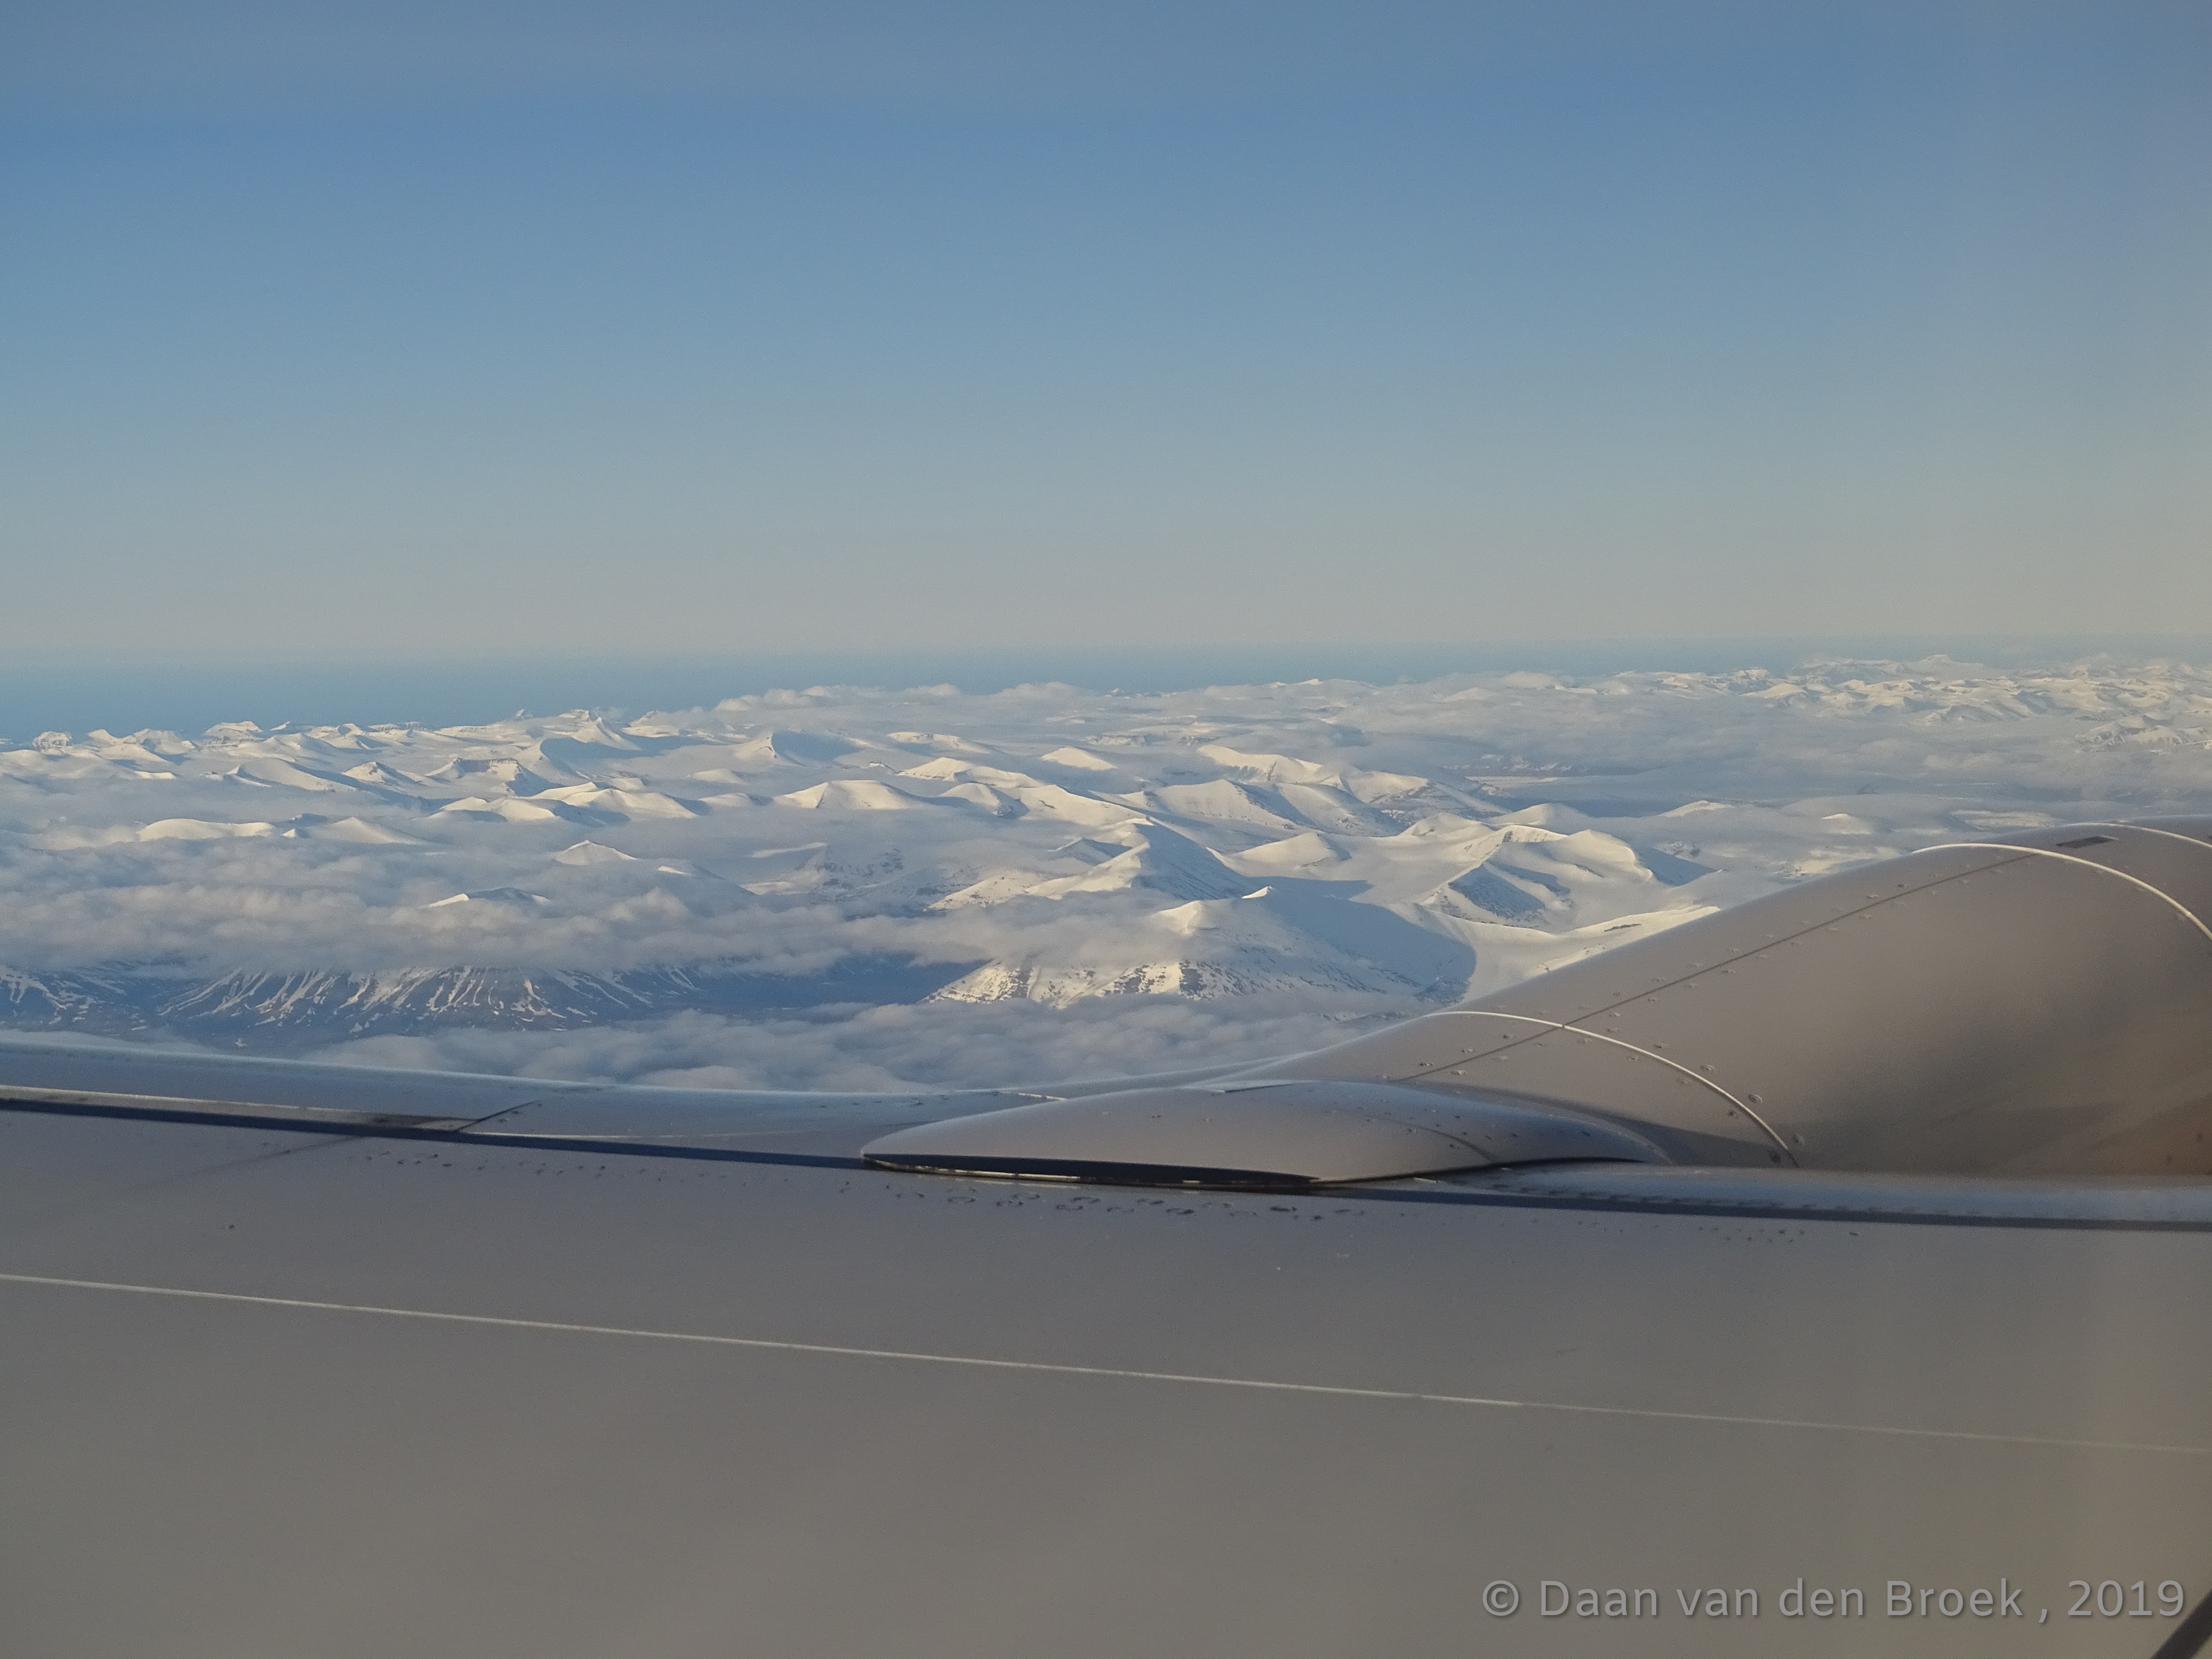 Svalbard in Summer - Magnificent views from the airplane